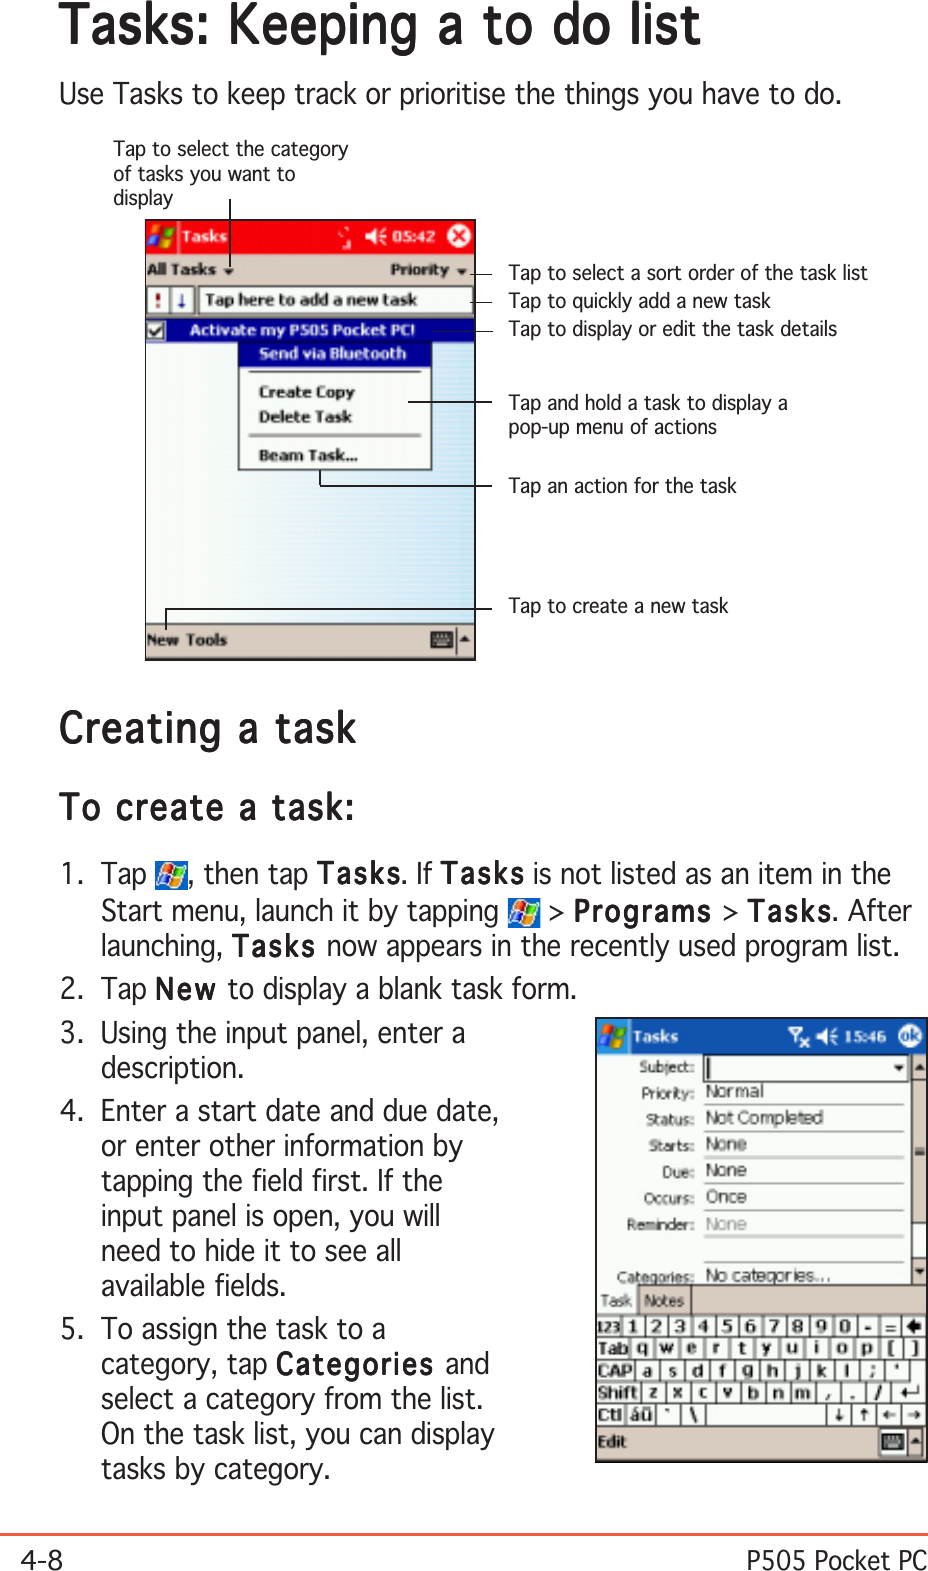 4-8P505 Pocket PCTasks: Keeping a to do listTasks: Keeping a to do listTasks: Keeping a to do listTasks: Keeping a to do listTasks: Keeping a to do listUse Tasks to keep track or prioritise the things you have to do.Creating a taskCreating a taskCreating a taskCreating a taskCreating a taskTo create a task:To create a task:To create a task:To create a task:To create a task:1. Tap  , then tap TasksTasksTasksTasksTasks. If TasksTasksTasksTasksTas k s is not listed as an item in theStart menu, launch it by tapping   &gt; ProgramsProgramsProgramsProgramsPrograms &gt; TasksTasksTasksTasksTas k s. Afterlaunching, TasksTasksTasksTasksTasks now appears in the recently used program list.2. Tap NewNewNewNewNe w to display a blank task form.3. Using the input panel, enter adescription.4. Enter a start date and due date,or enter other information bytapping the field first. If theinput panel is open, you willneed to hide it to see allavailable fields.5. To assign the task to acategory, tap CategoriesCategoriesCategoriesCategoriesCategories andselect a category from the list.On the task list, you can displaytasks by category.Tap to select a sort order of the task listTap to select the categoryof tasks you want todisplayTap to display or edit the task detailsTap and hold a task to display apop-up menu of actionsTap an action for the taskTap to create a new taskTap to quickly add a new task